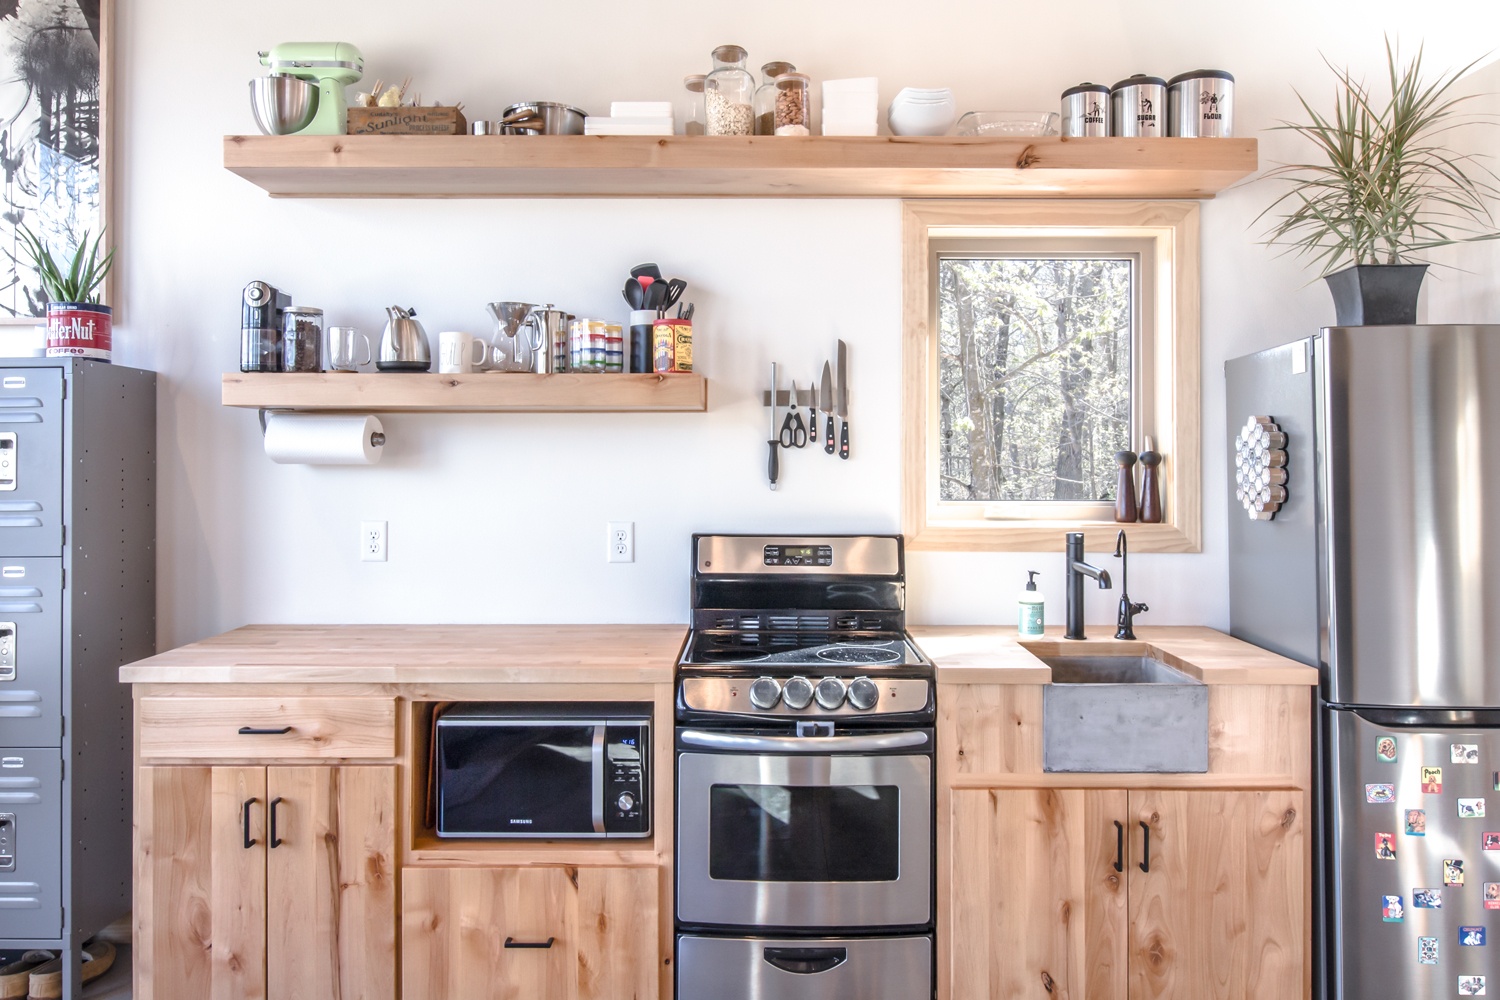 18 Tips for Making the Most of Your Small Kitchen Design